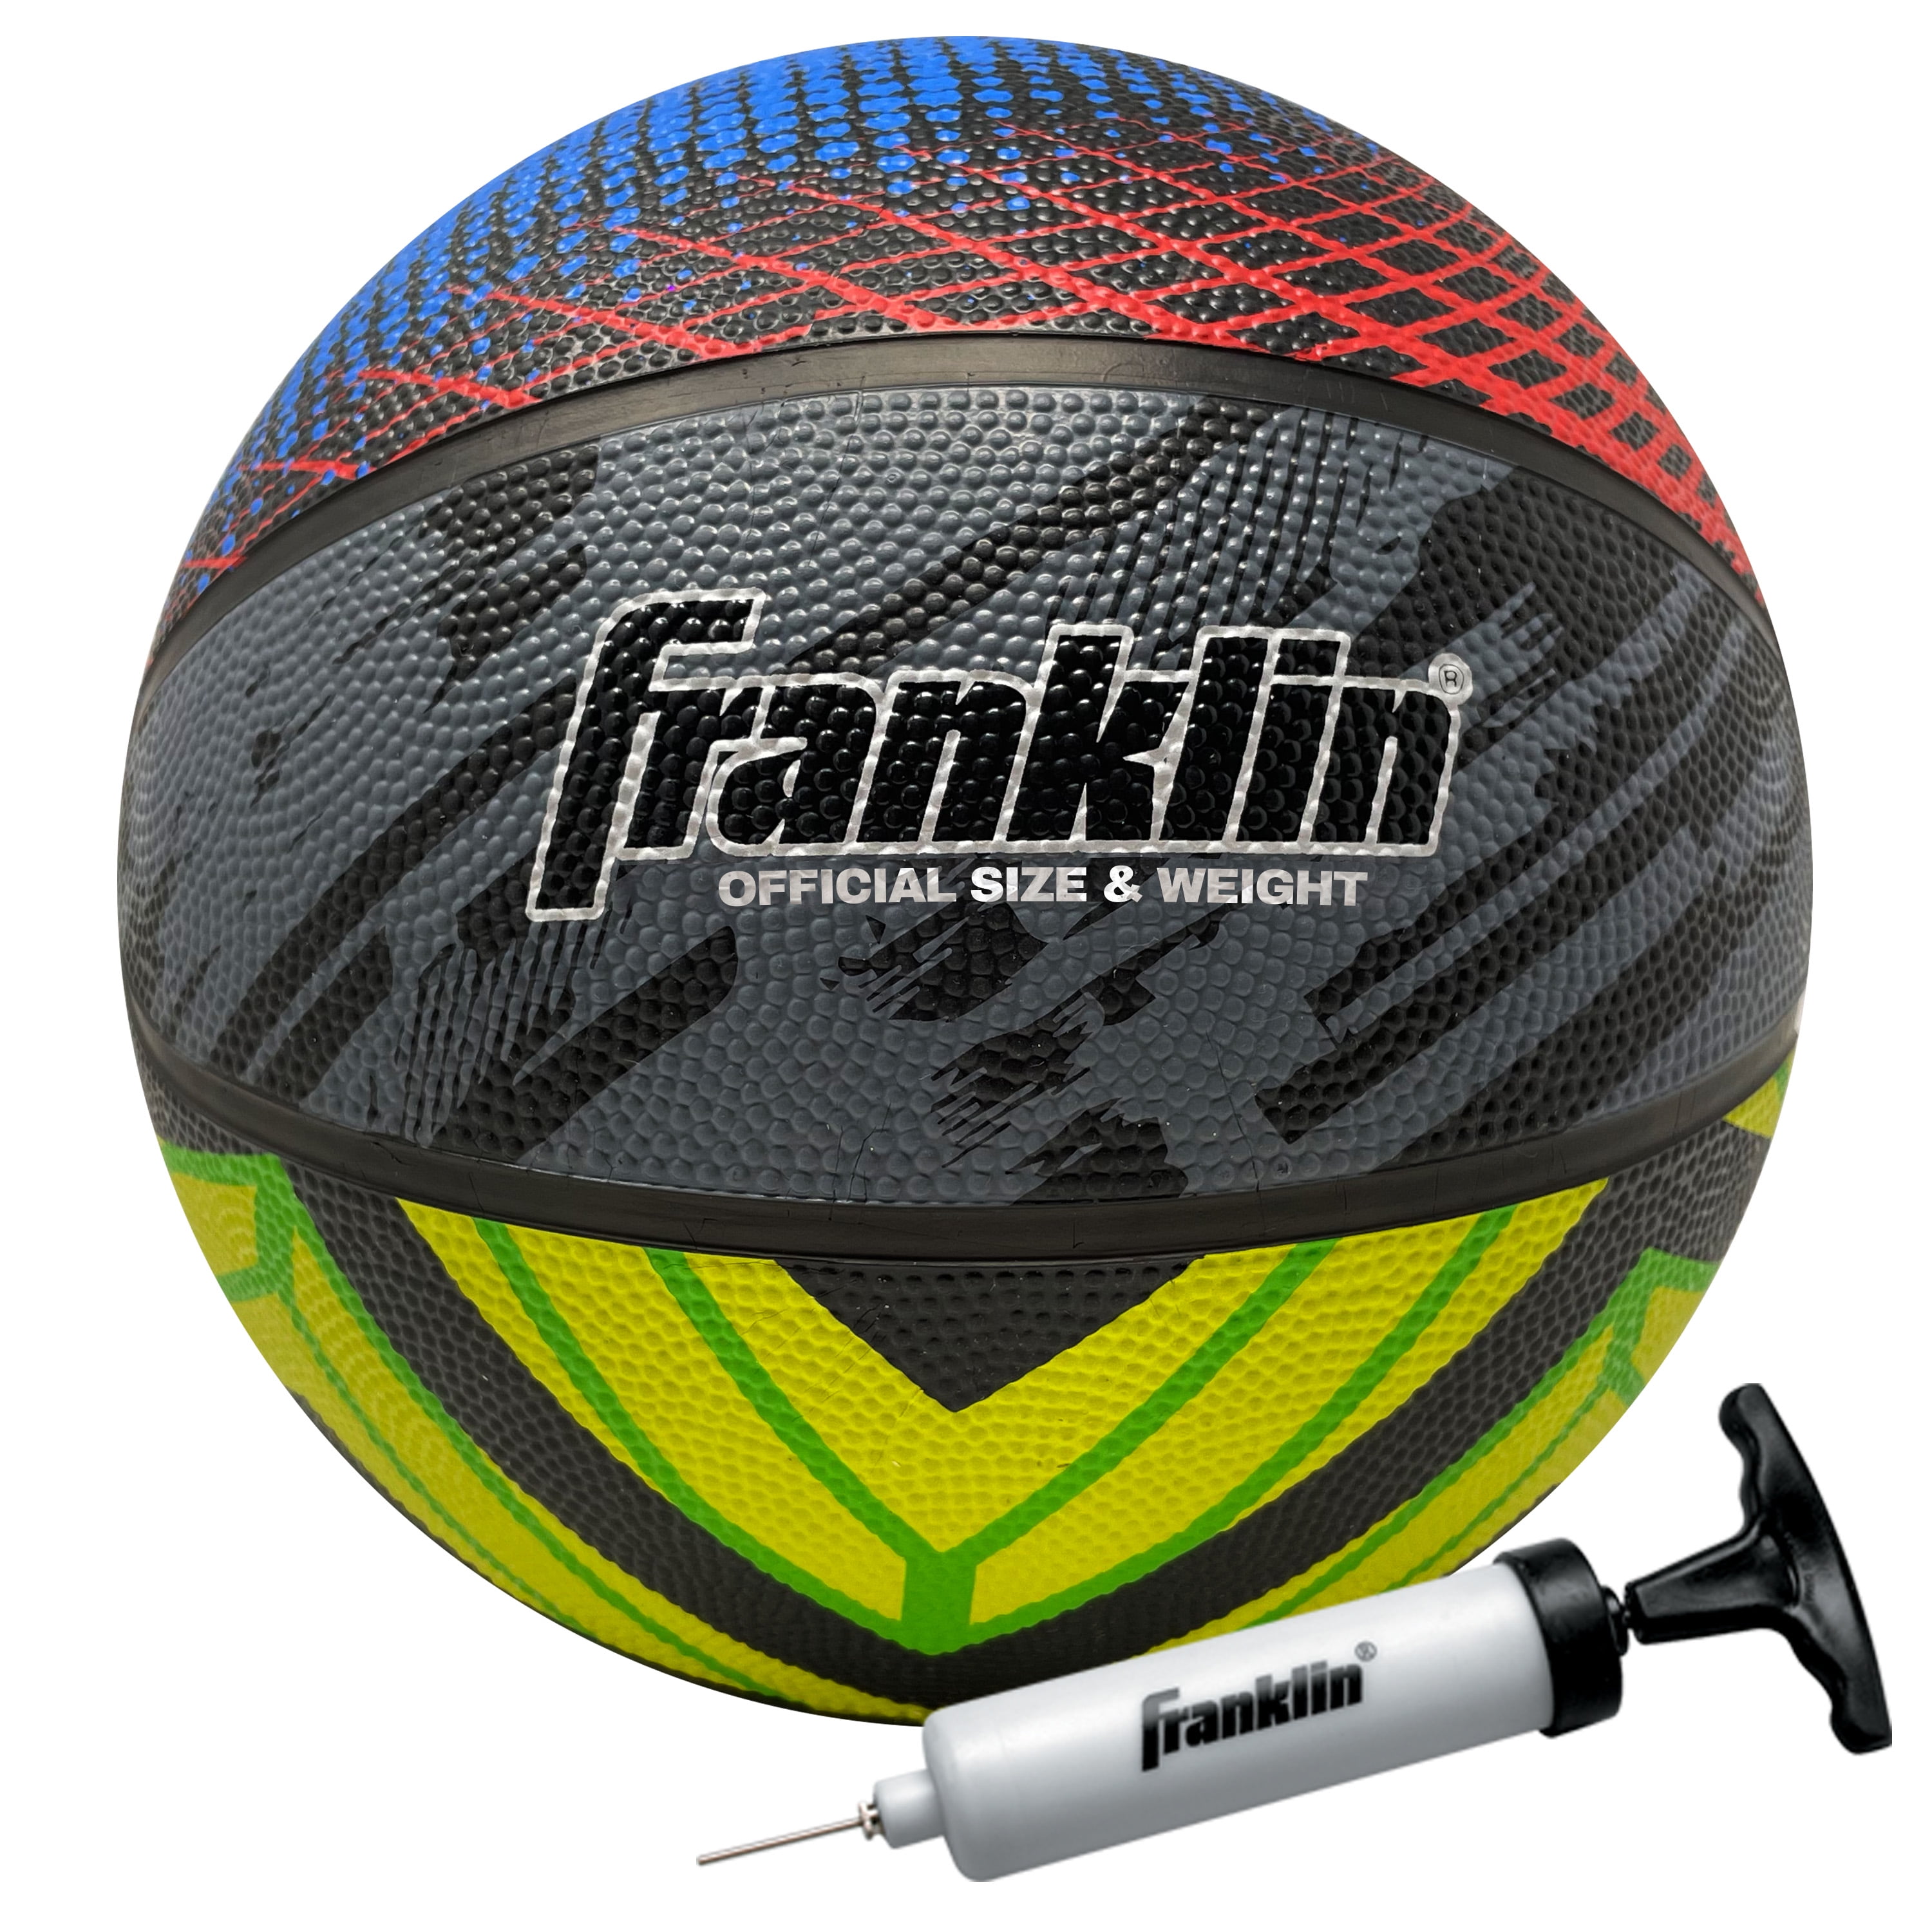 Outdoor Street Basketball Indoor Official Size Basketball Franklin Sports Hard Court Basketball 29.5 Rubber Basketball Air Pump Included 